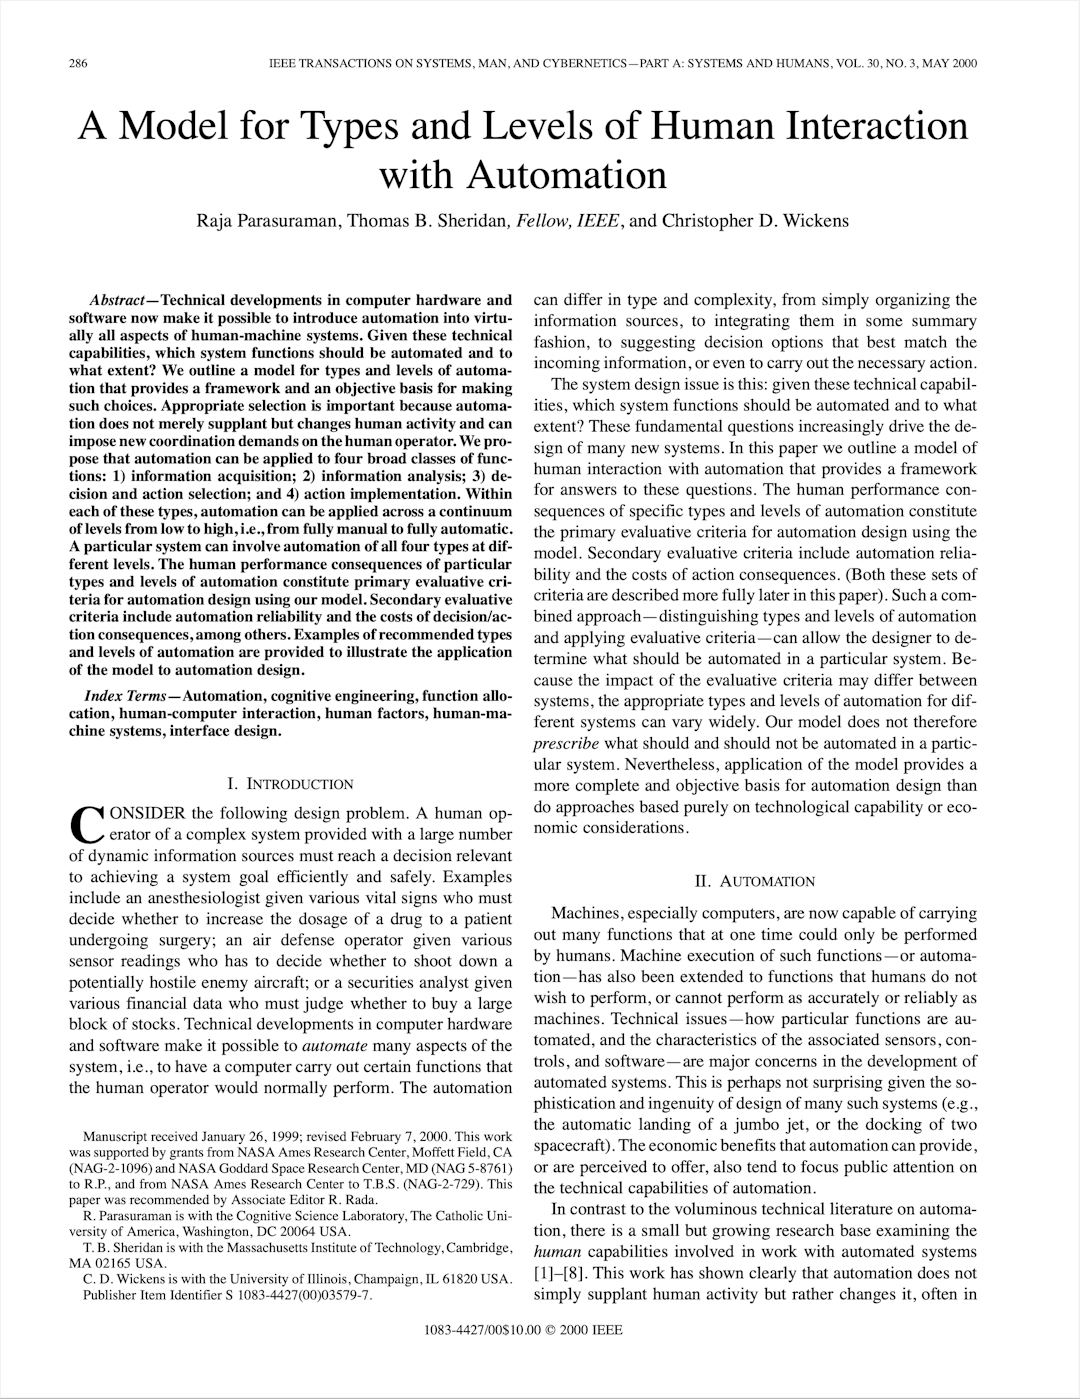 A Model for Types and Levels of Human Interaction with Automation